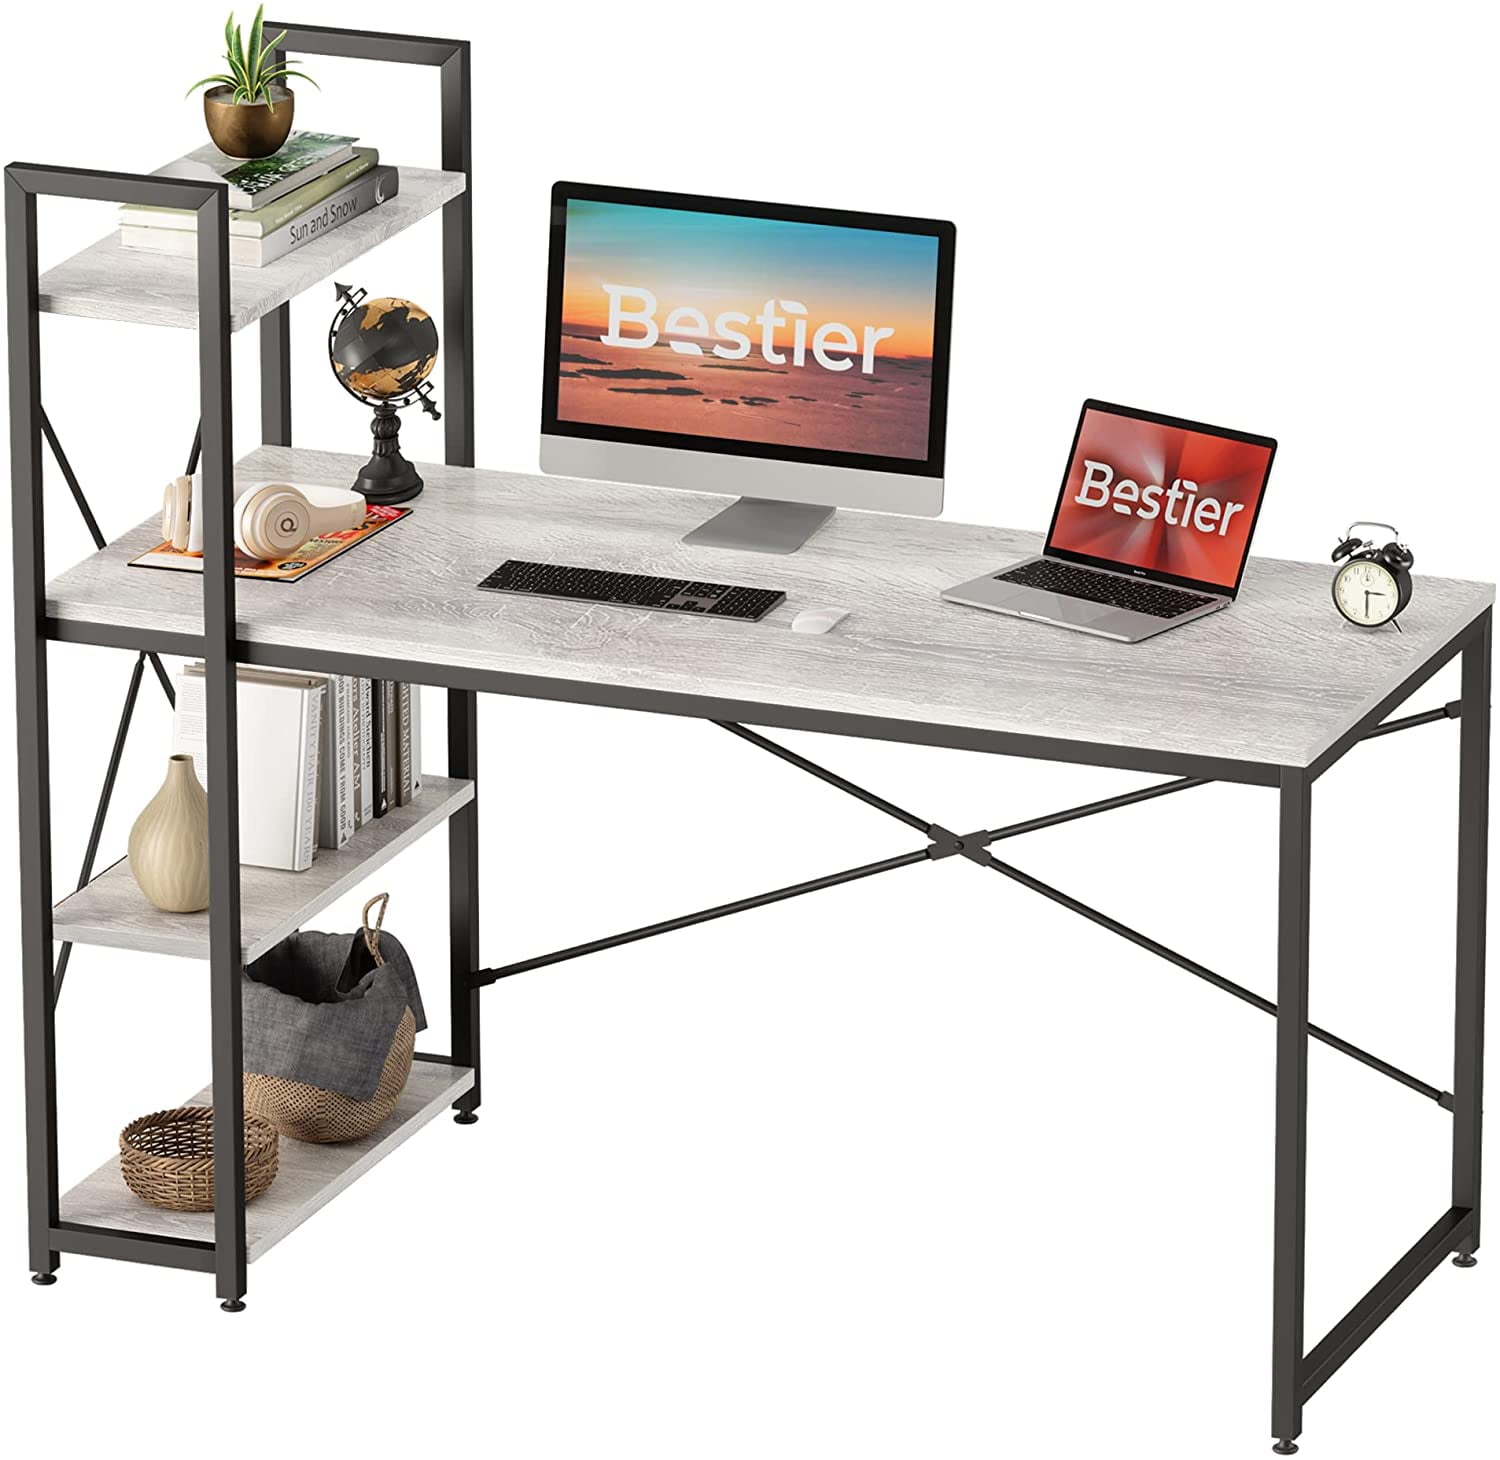 Rustic Brown Bestier Industrial Desk with Storage Drawers 55 inch Writing Study Computer Table Workstation with Keyboard Tray for Home Office